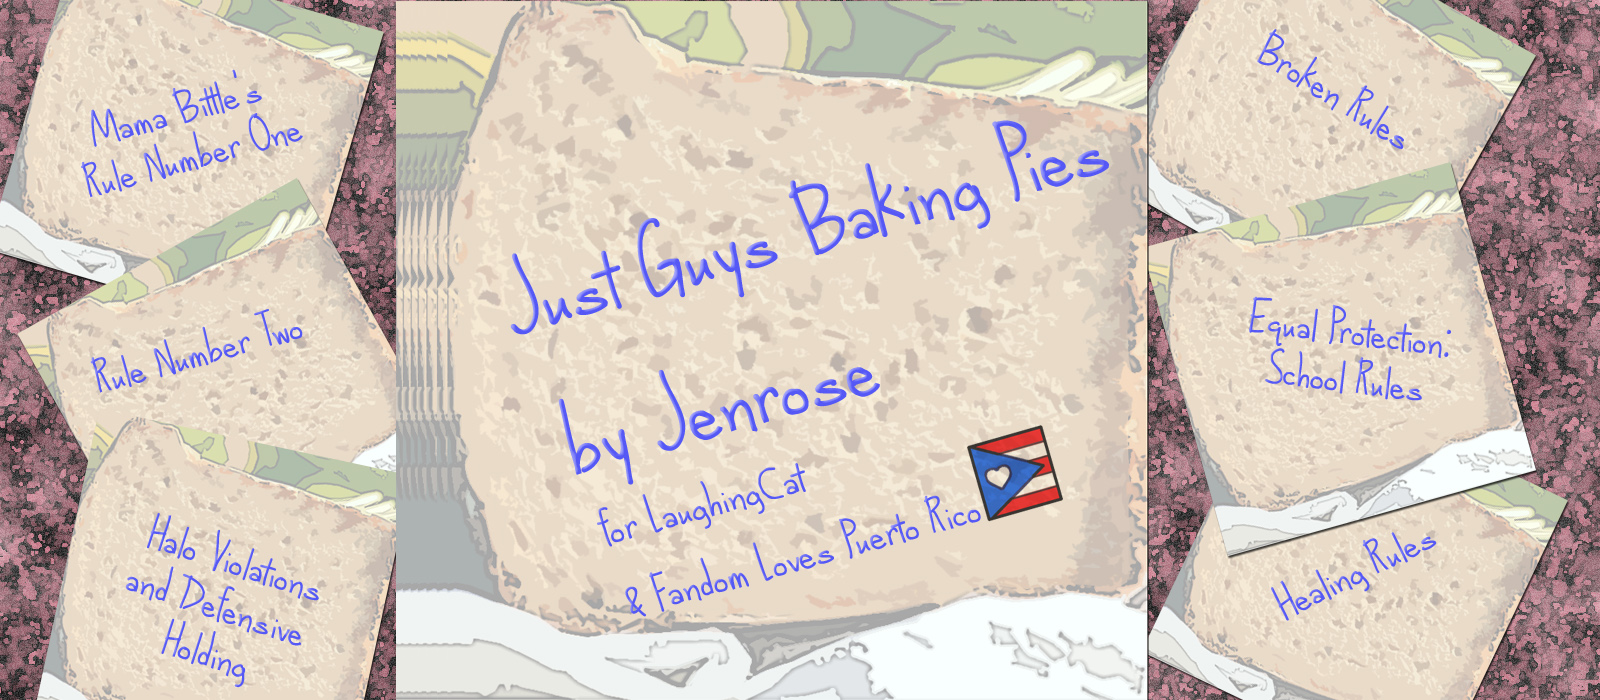 Stylized stationery with a faded picture of bread on it that looks similar to post it notes forms the bulk of the images, with writing on each note. In the center, a large square piece that says "Just Guys Baking Pies by Jenrose for laughingcat and Fandom Loves Puerto Rico" with a small picture of the Puerto rican flag with a heart rather than a star in the blue triangle. To each side are smaller notes, each with a title from Jenrose's Actually I Do Make The Rules fanfic series in the Check Please fandom. The stationery represents the notes that Bitty leaves in lunches, and the titles are all rendered to look like blue ball point pen printed by hand.